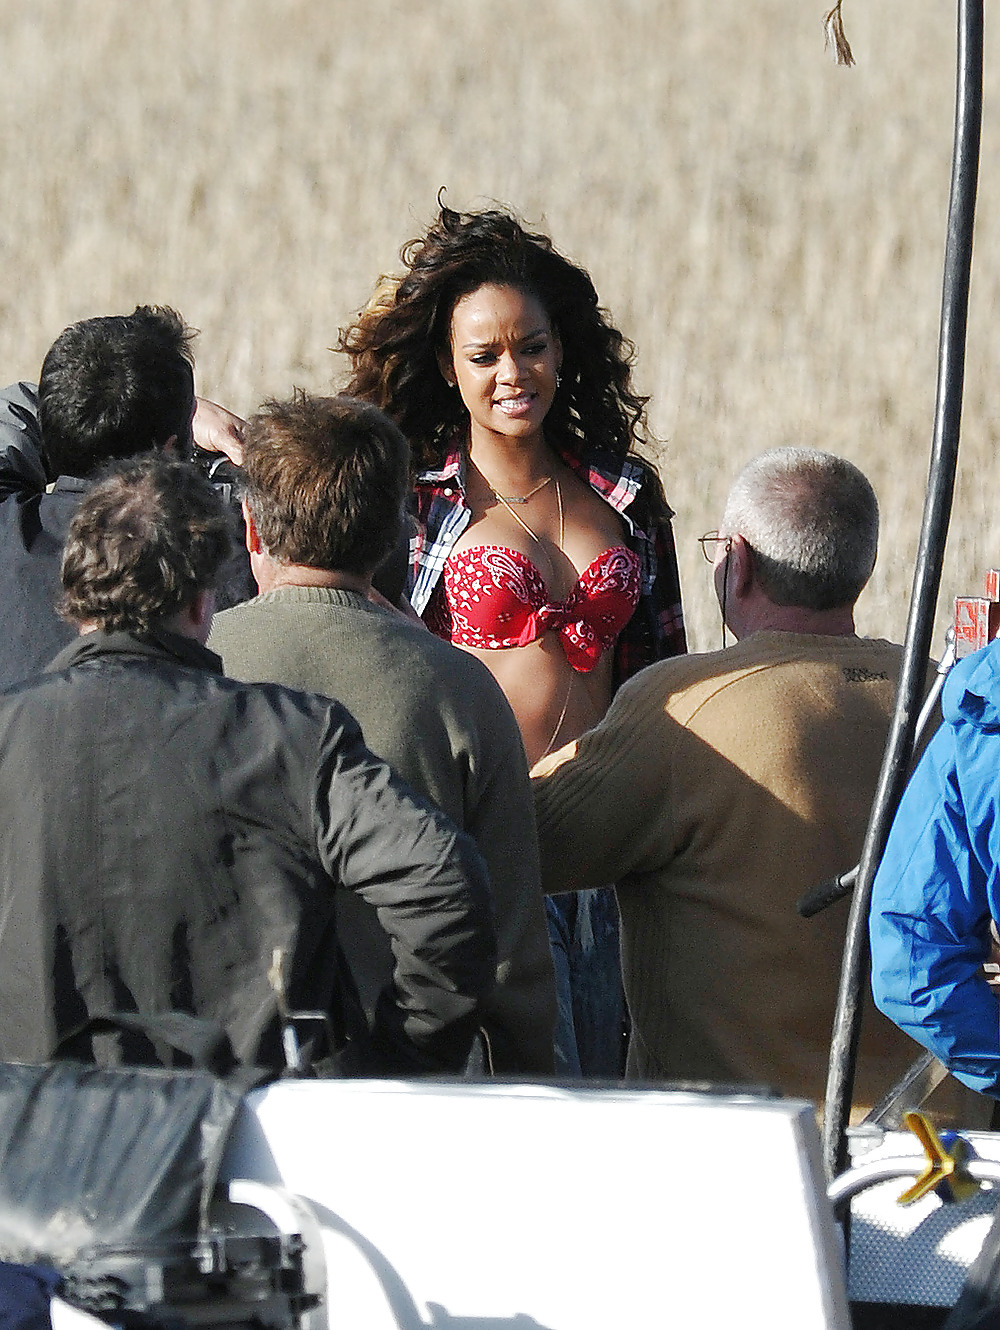 Rihanna filming we found love in ireland grabs tits
 #9959559